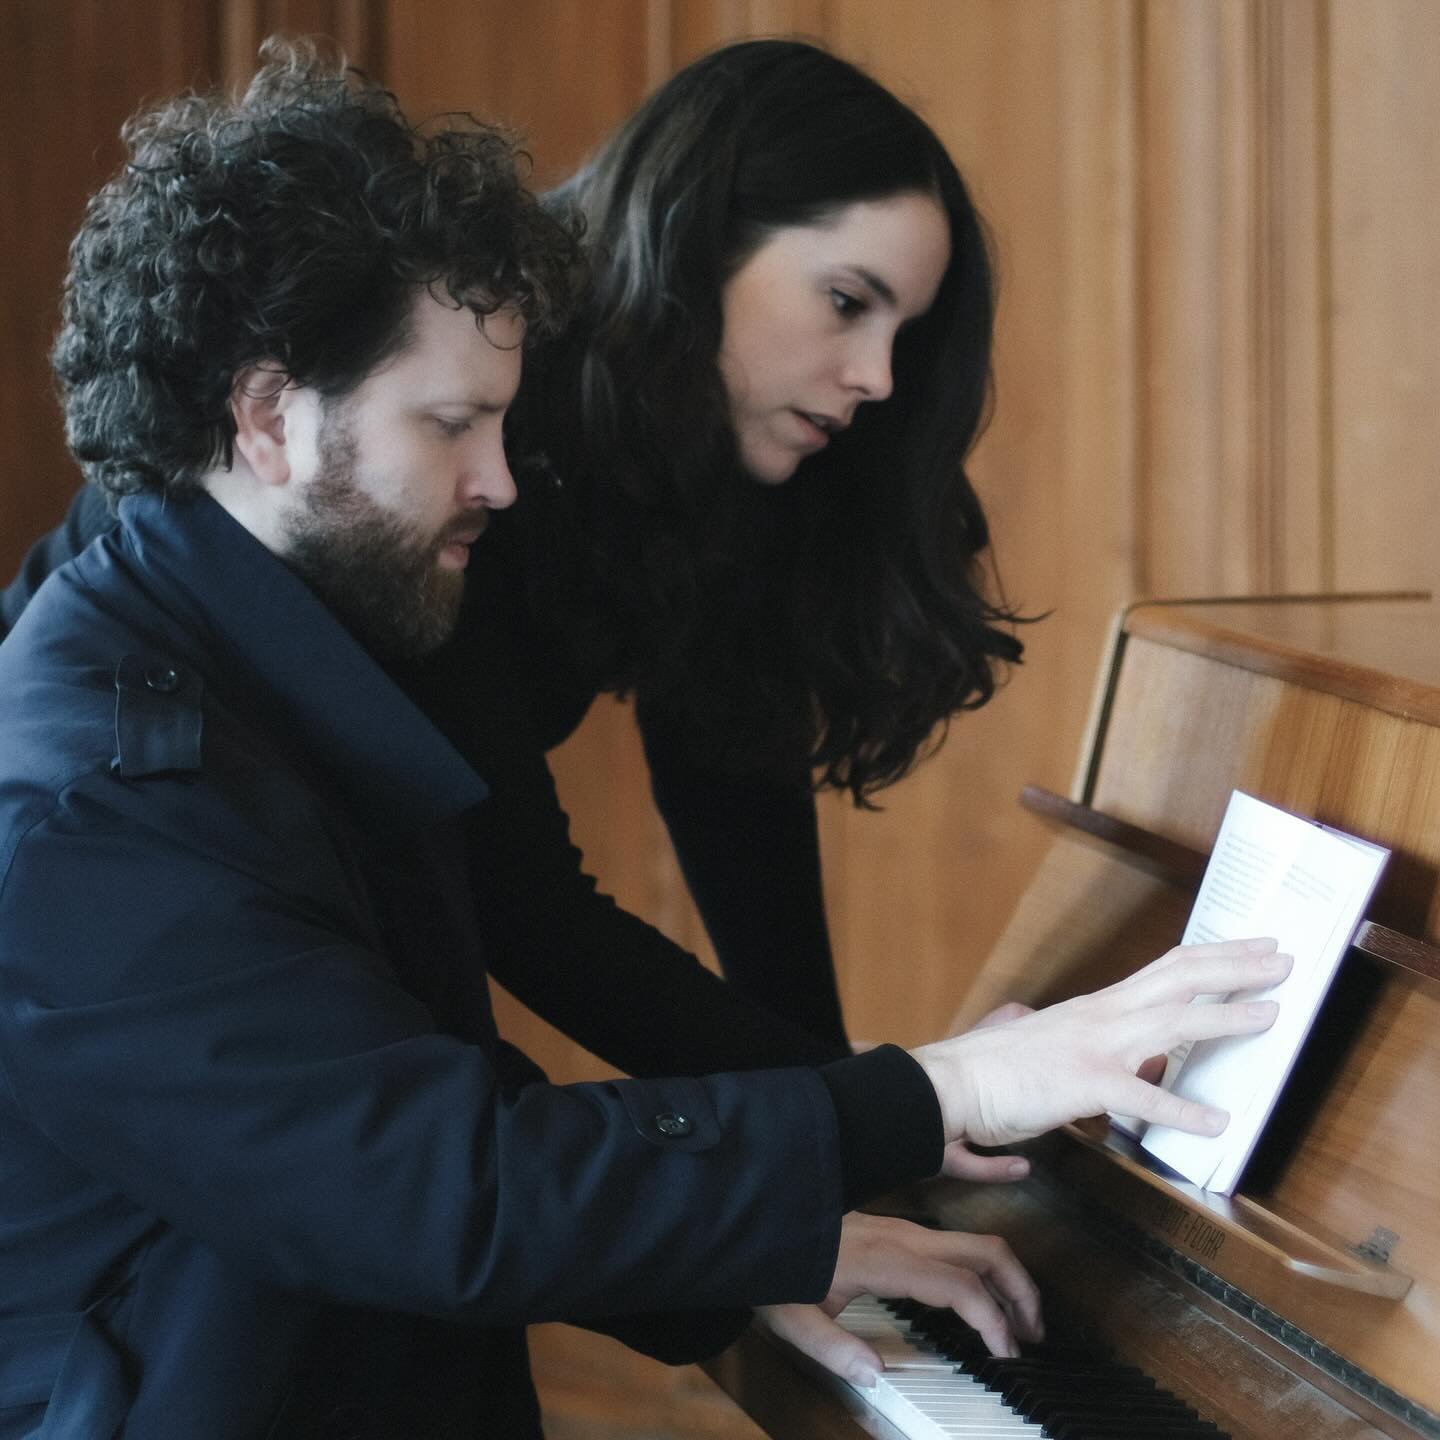 Channeling the composer within and creating the songs on Poems with @viktorarnason was so memorable. 

We are very grateful for the warm reception of our latest release, Piano poems, played and recorded by @viktorarnason. These songs have lately been